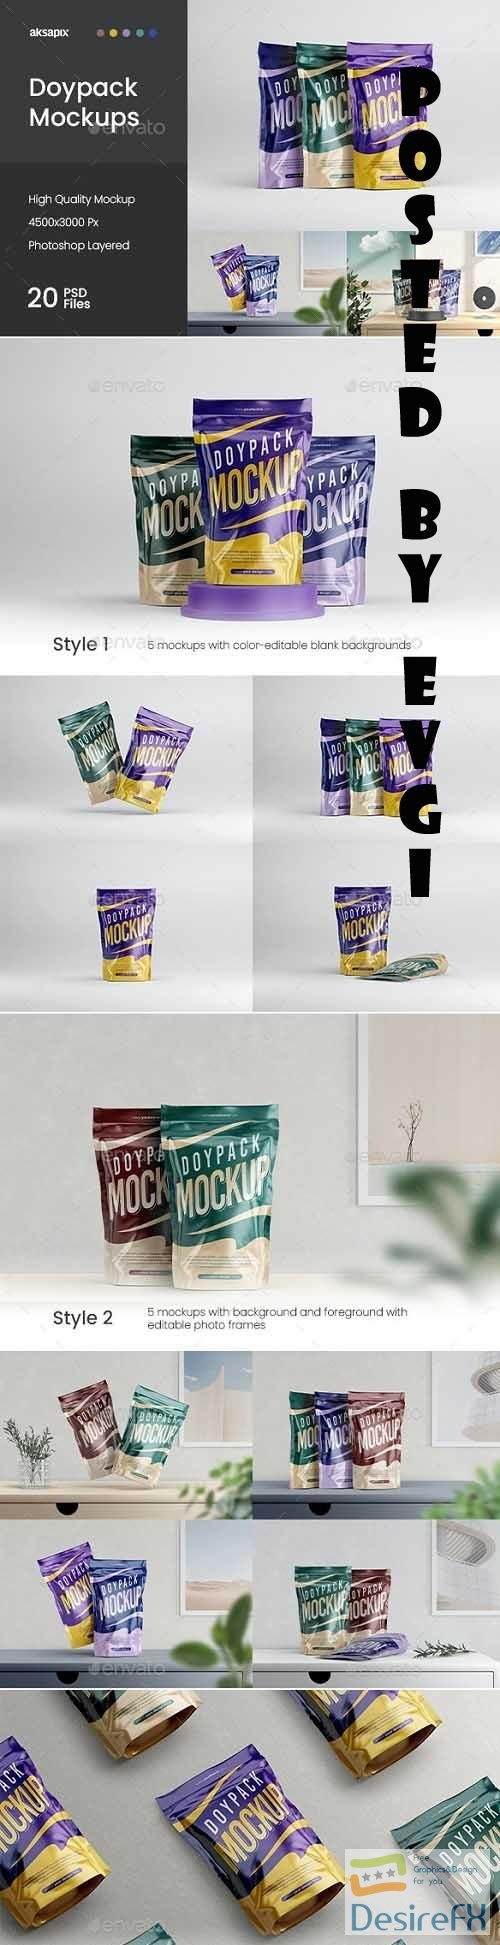 Doypack / Pouch Packaging Mockup - 37045401